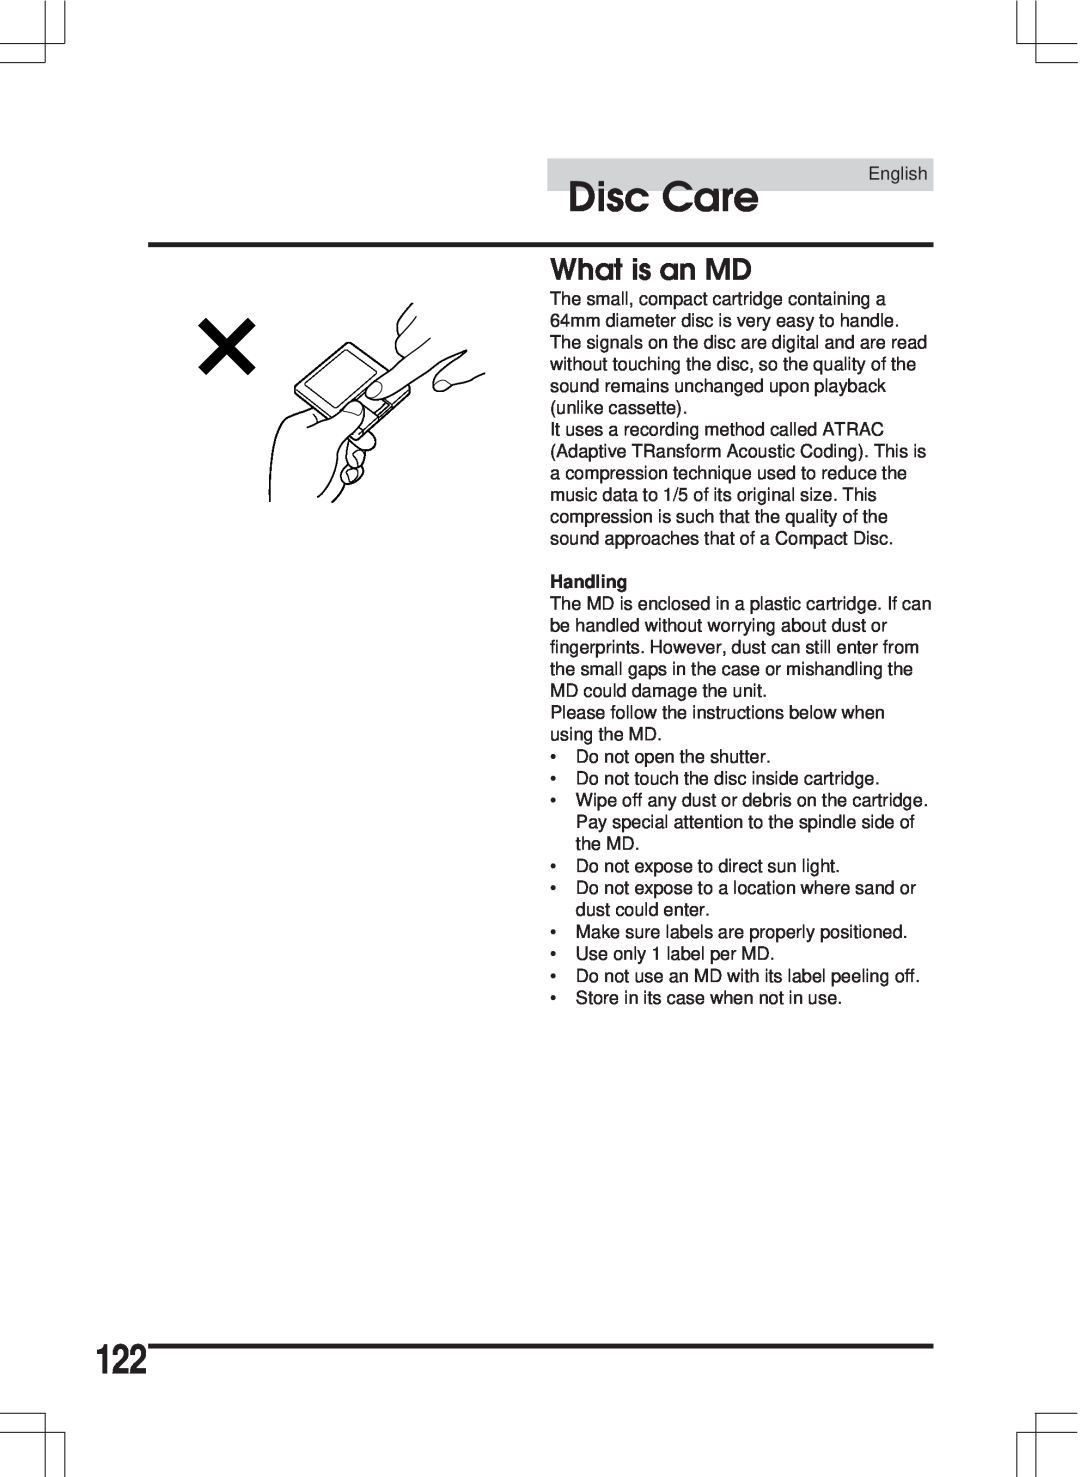 Alpine MDA-W890 owner manual What is an MD, Disc Care, Handling 